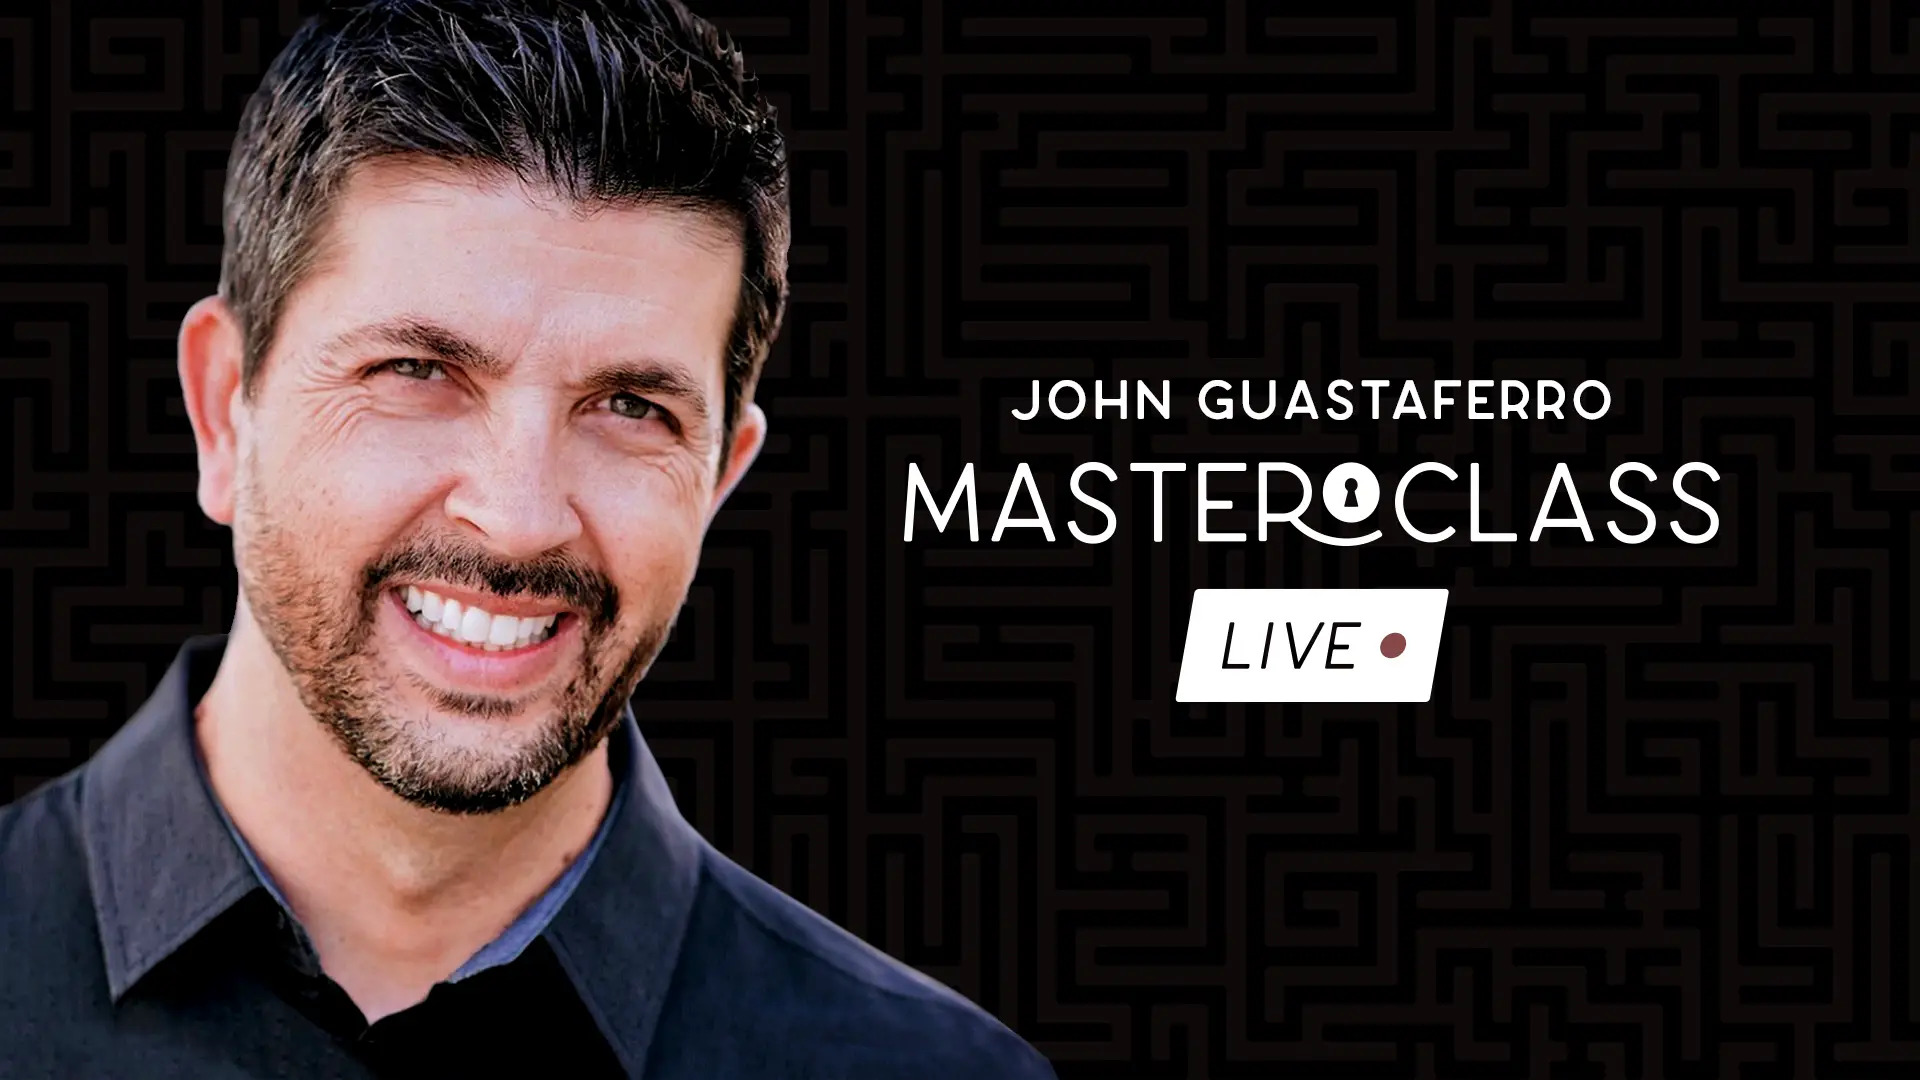 Masterclass Live Lecture by John Guastaferro (Week 1) (MP4 Video Download)